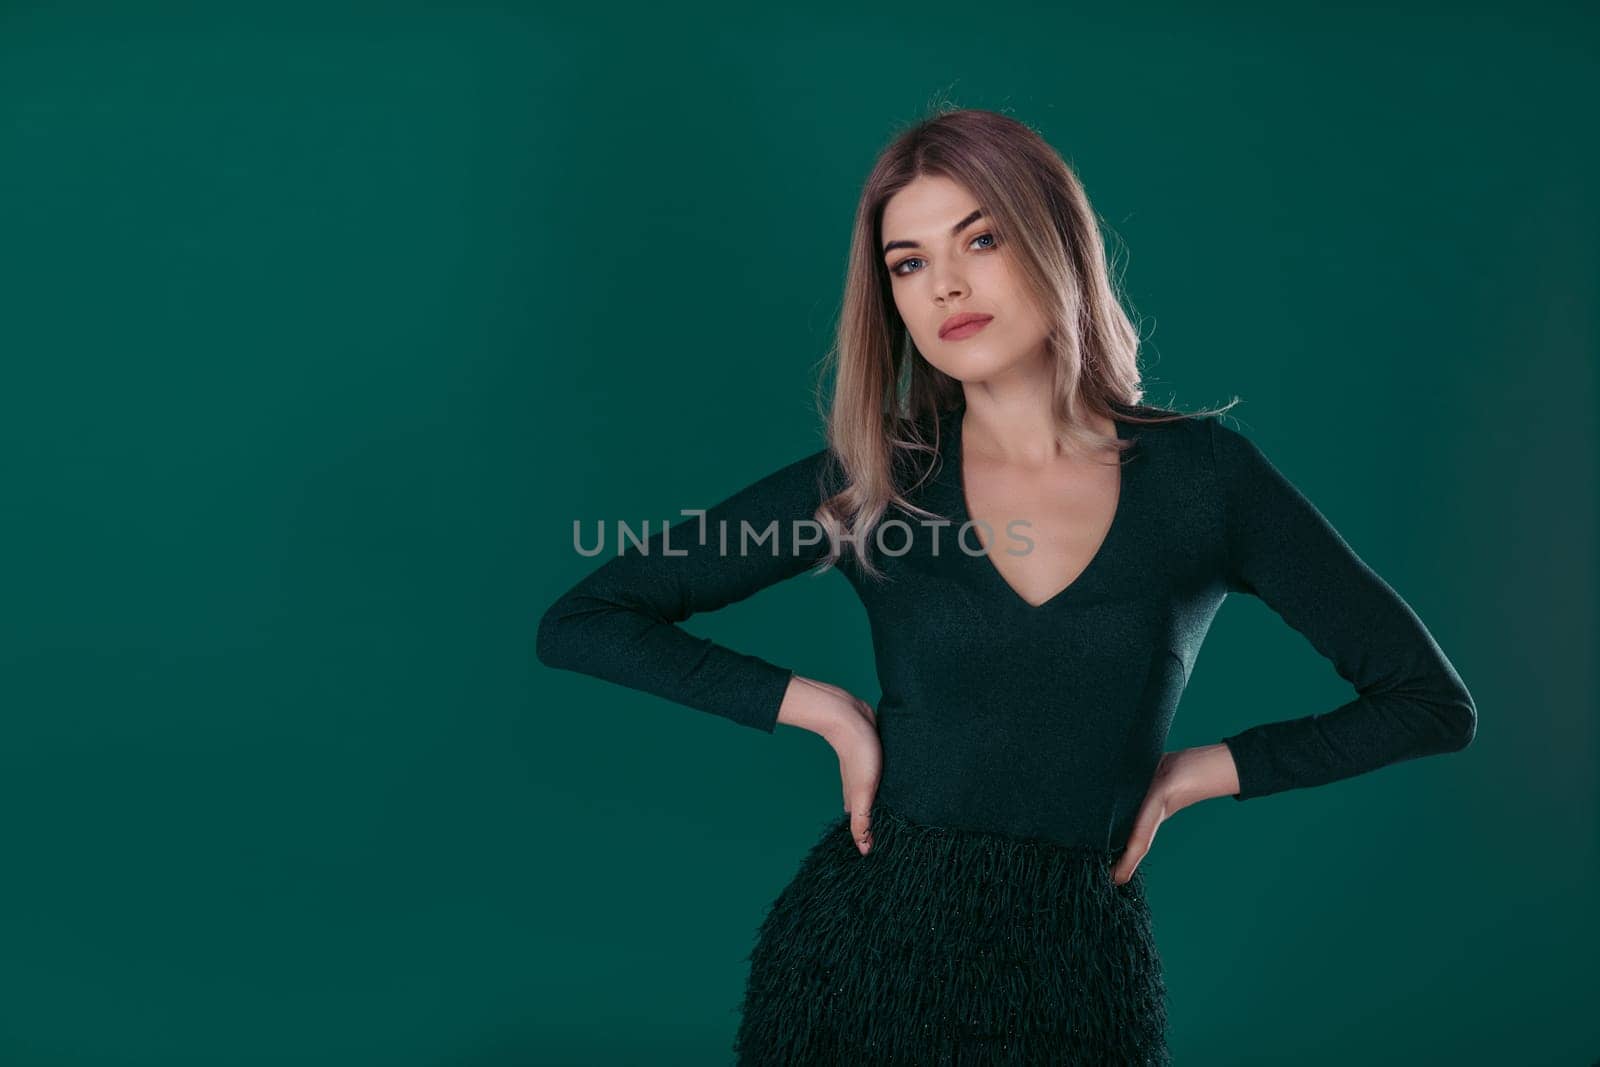 beautiful blonde woman posing in green dress on green background. space for text